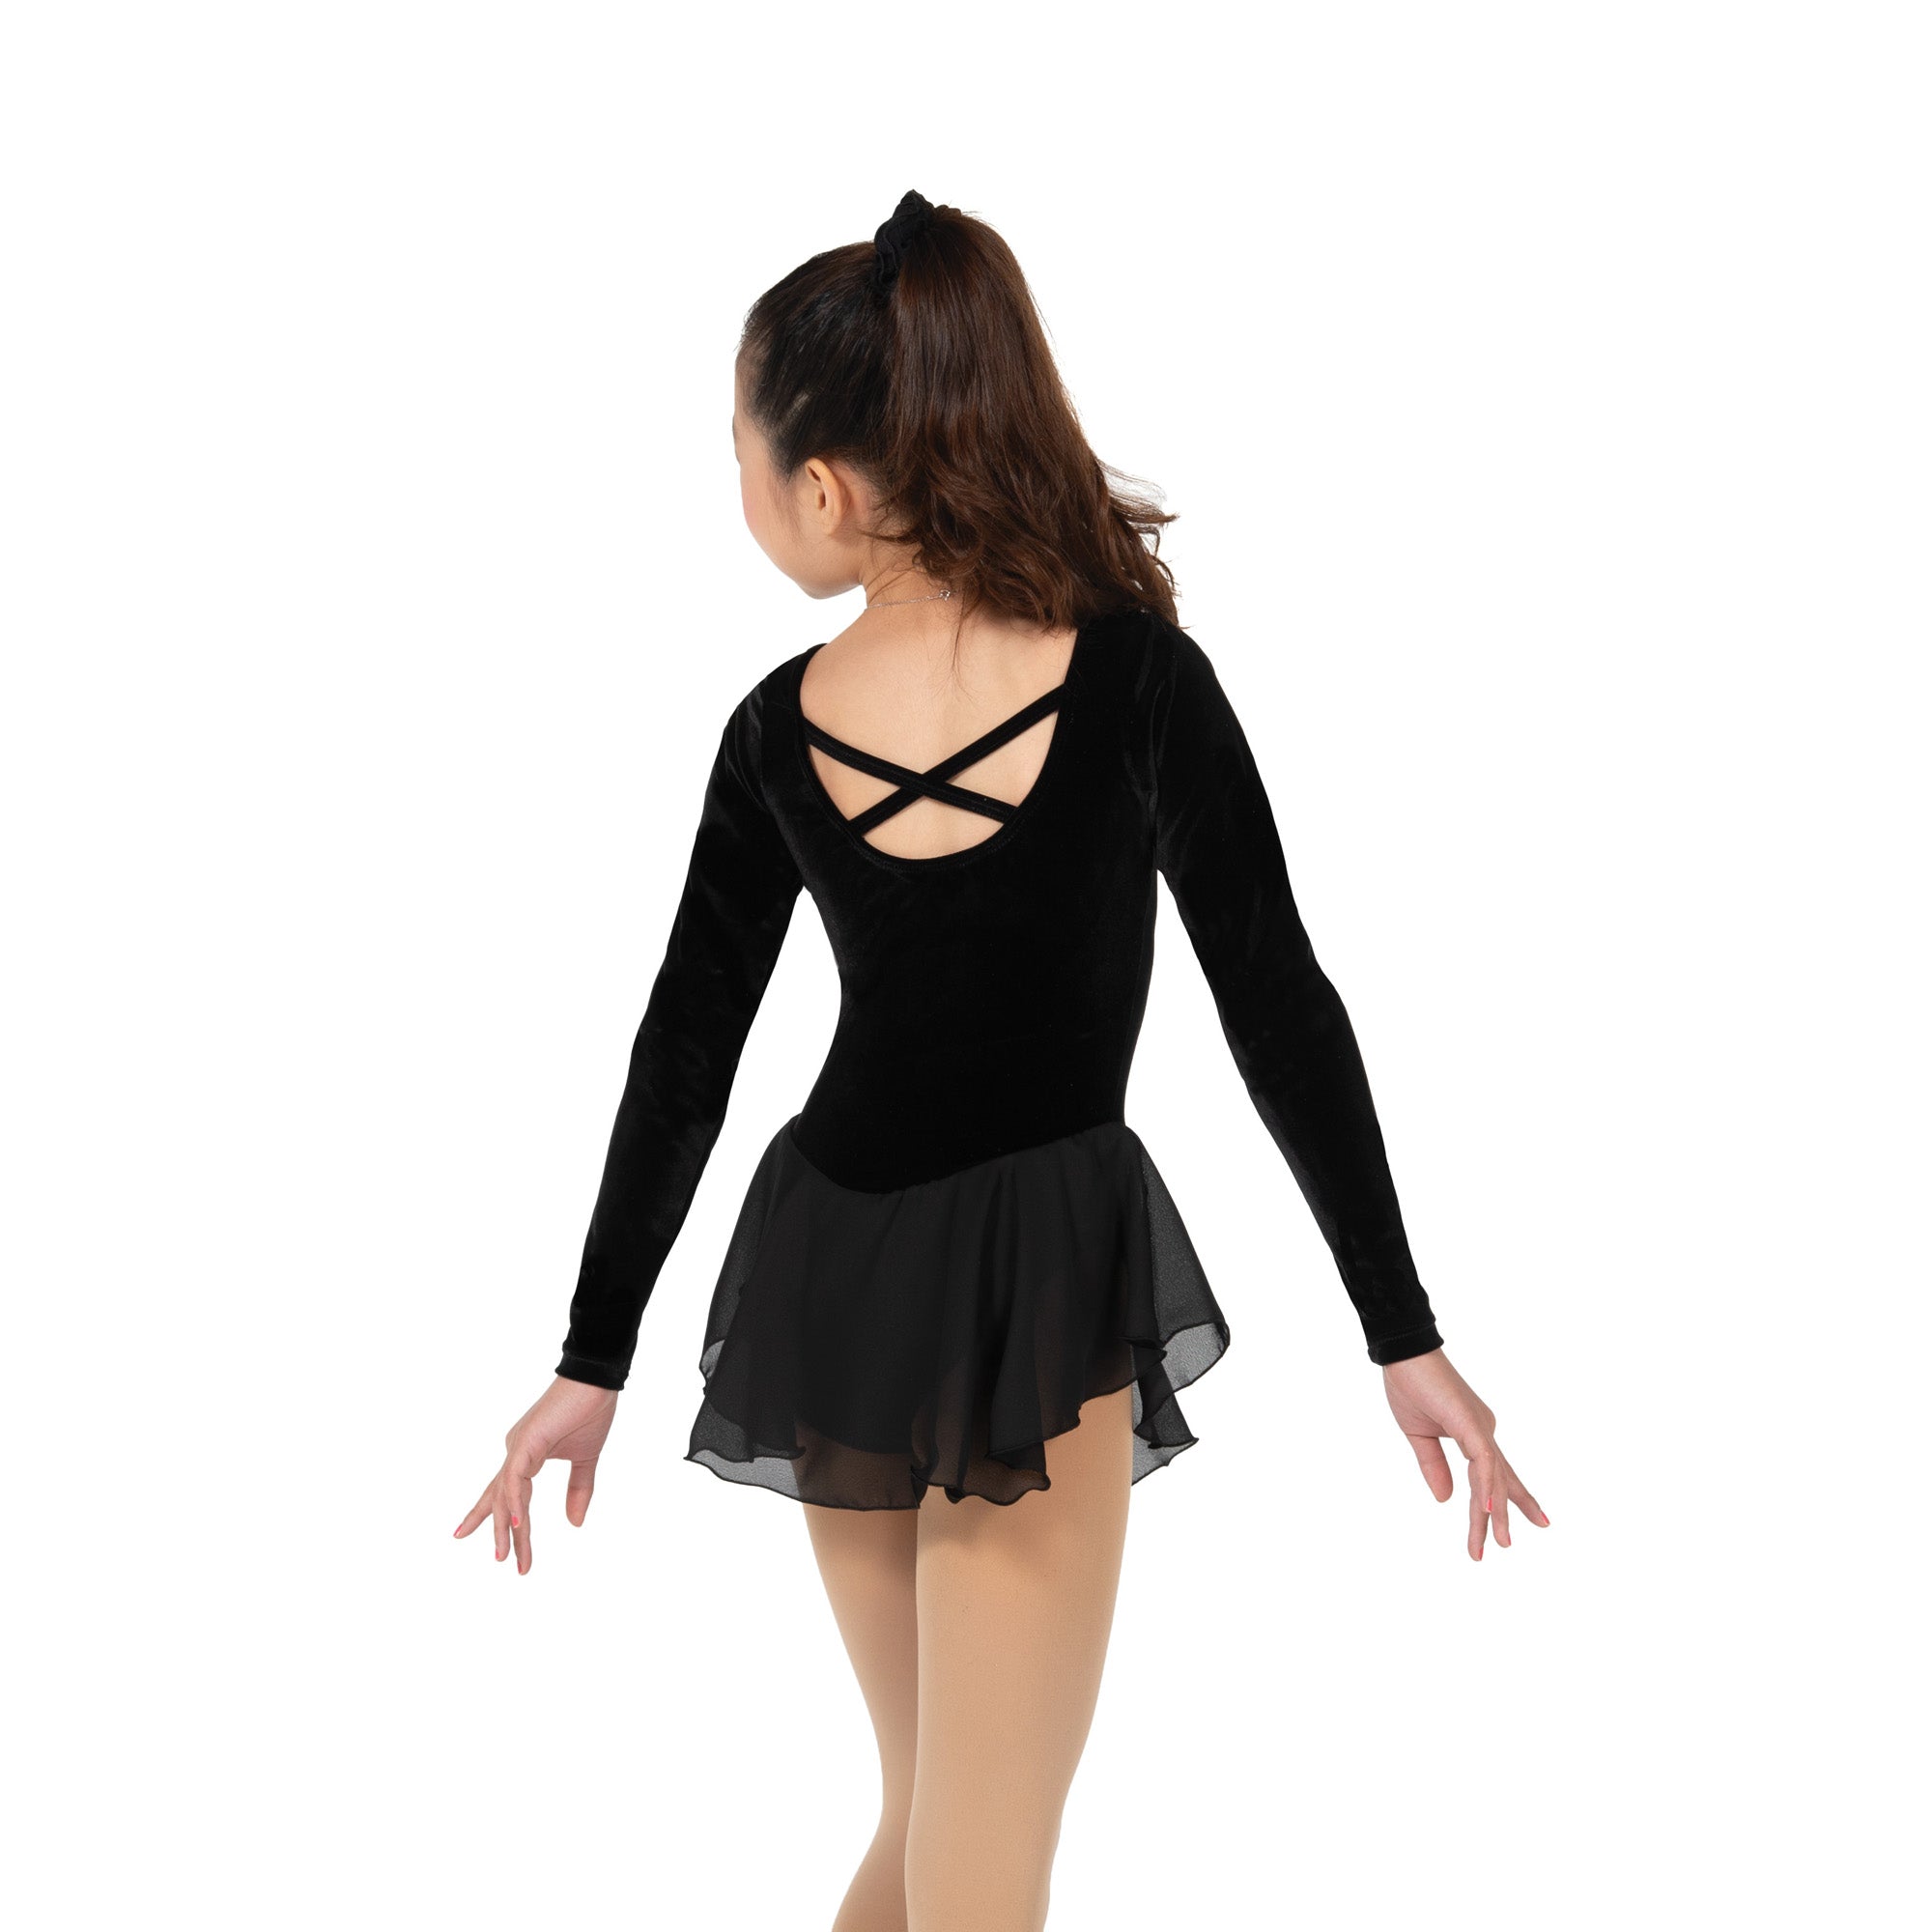 188 Skatesong Skating Dress in Black by Jerry's